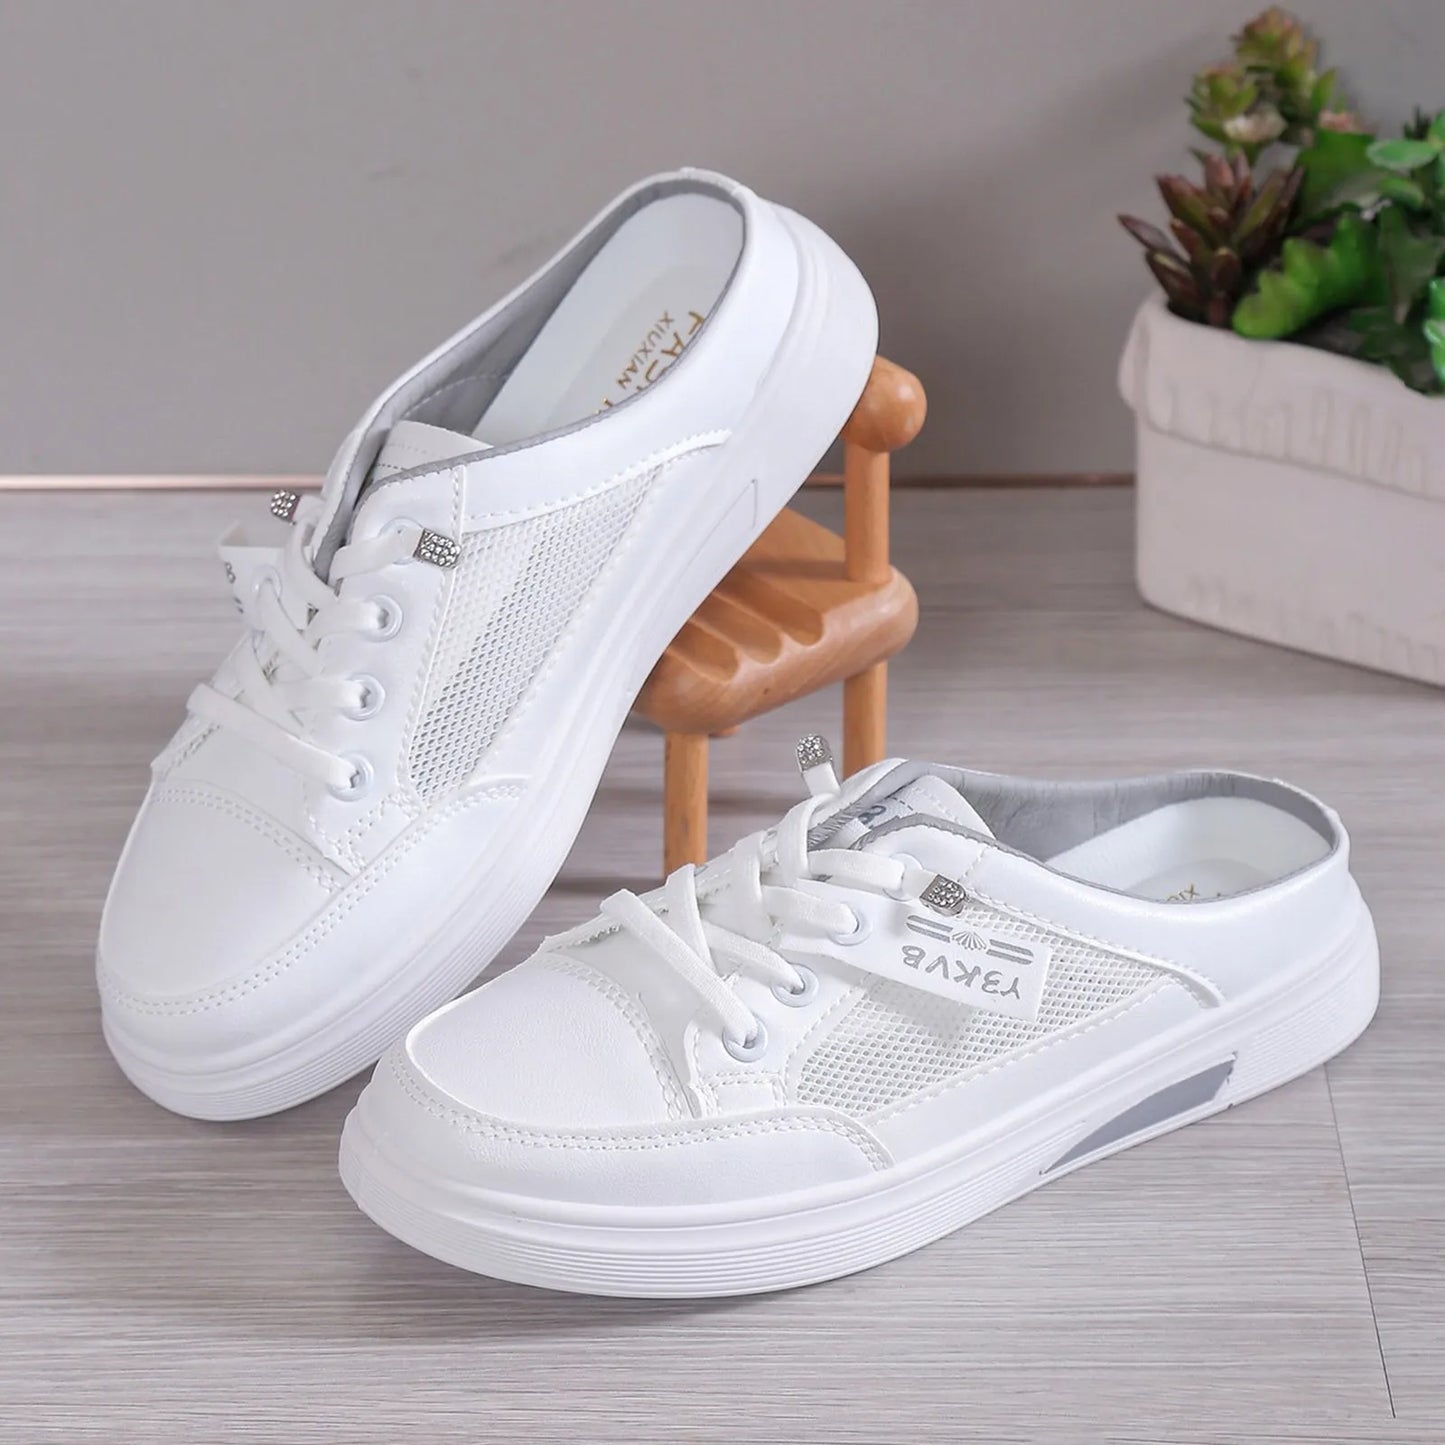 Small White Shoes For Women With Thick Soles/Mesh Surface For Breathability Business Casual Shoes For Women